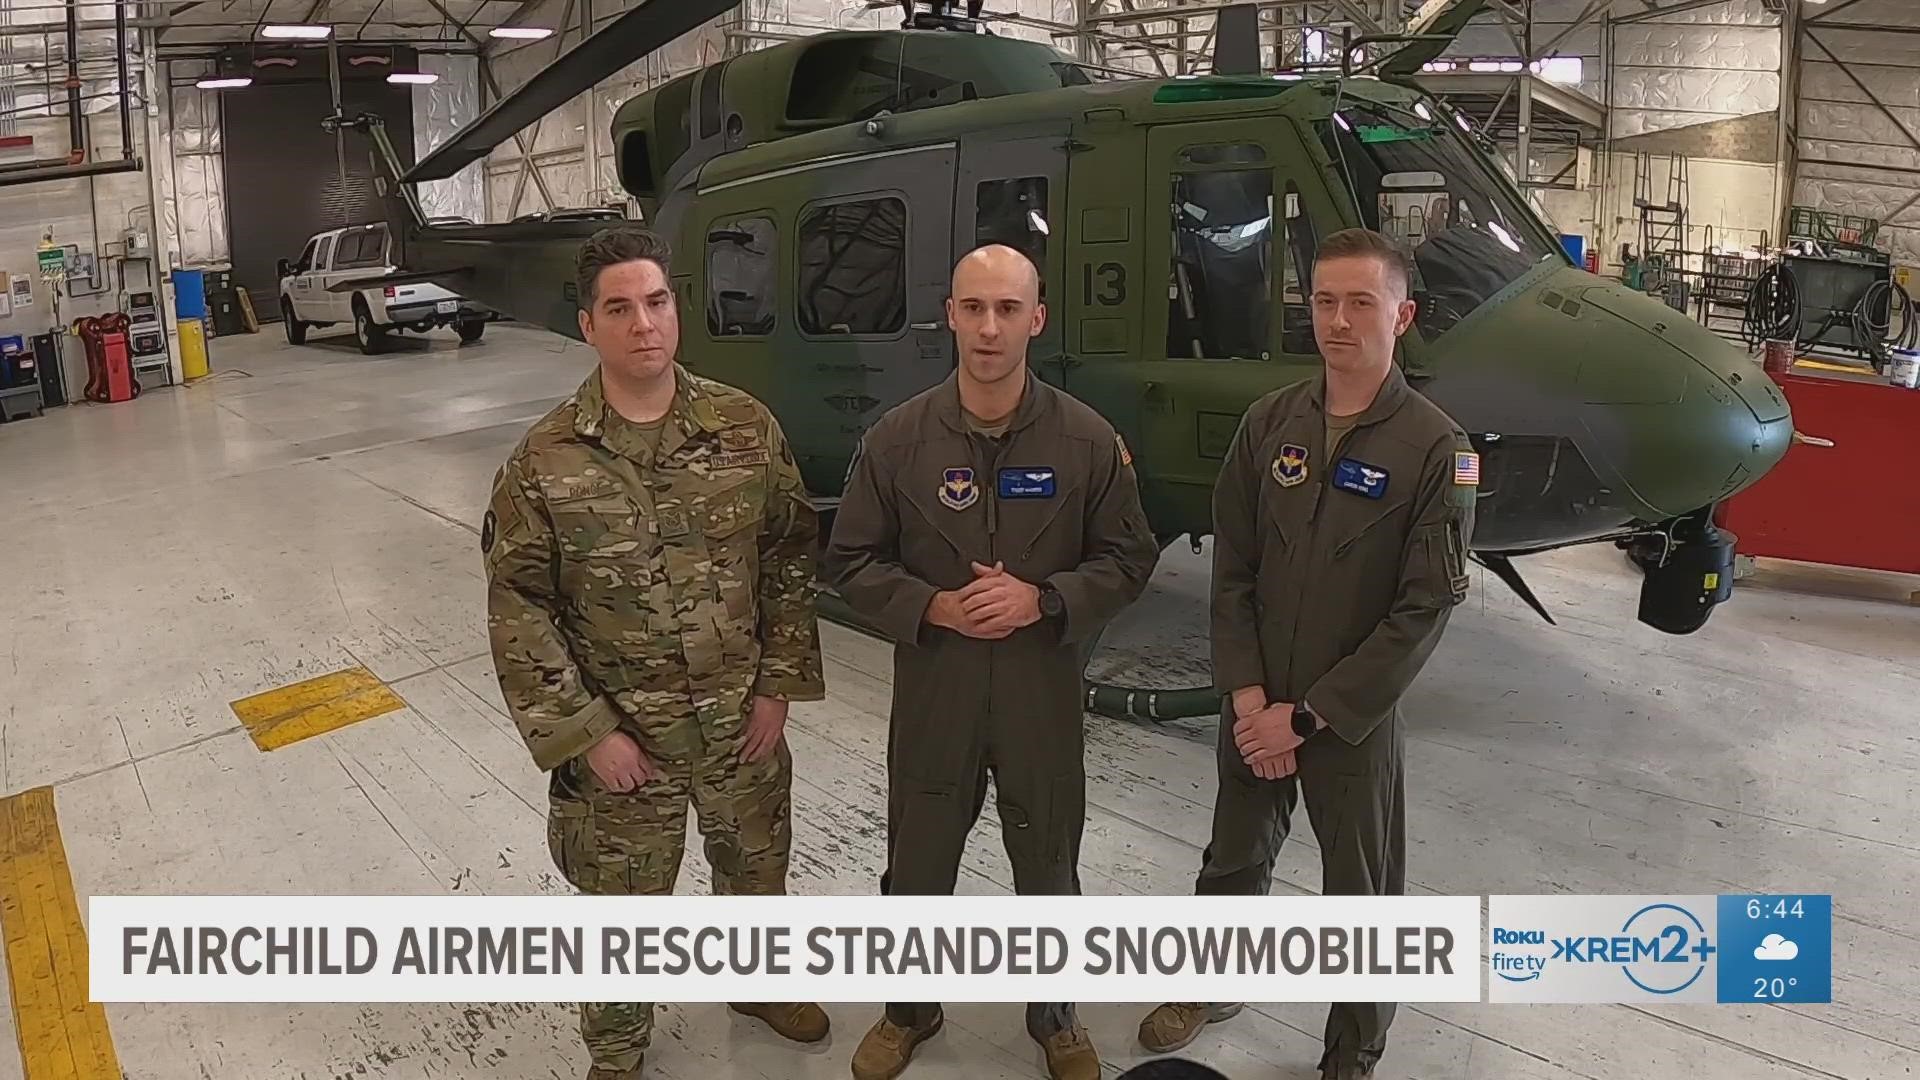 KREM 2 Photojournalist Dave Somers sat down with the airmen to talk about the training it takes to undergo daring rescue flights.